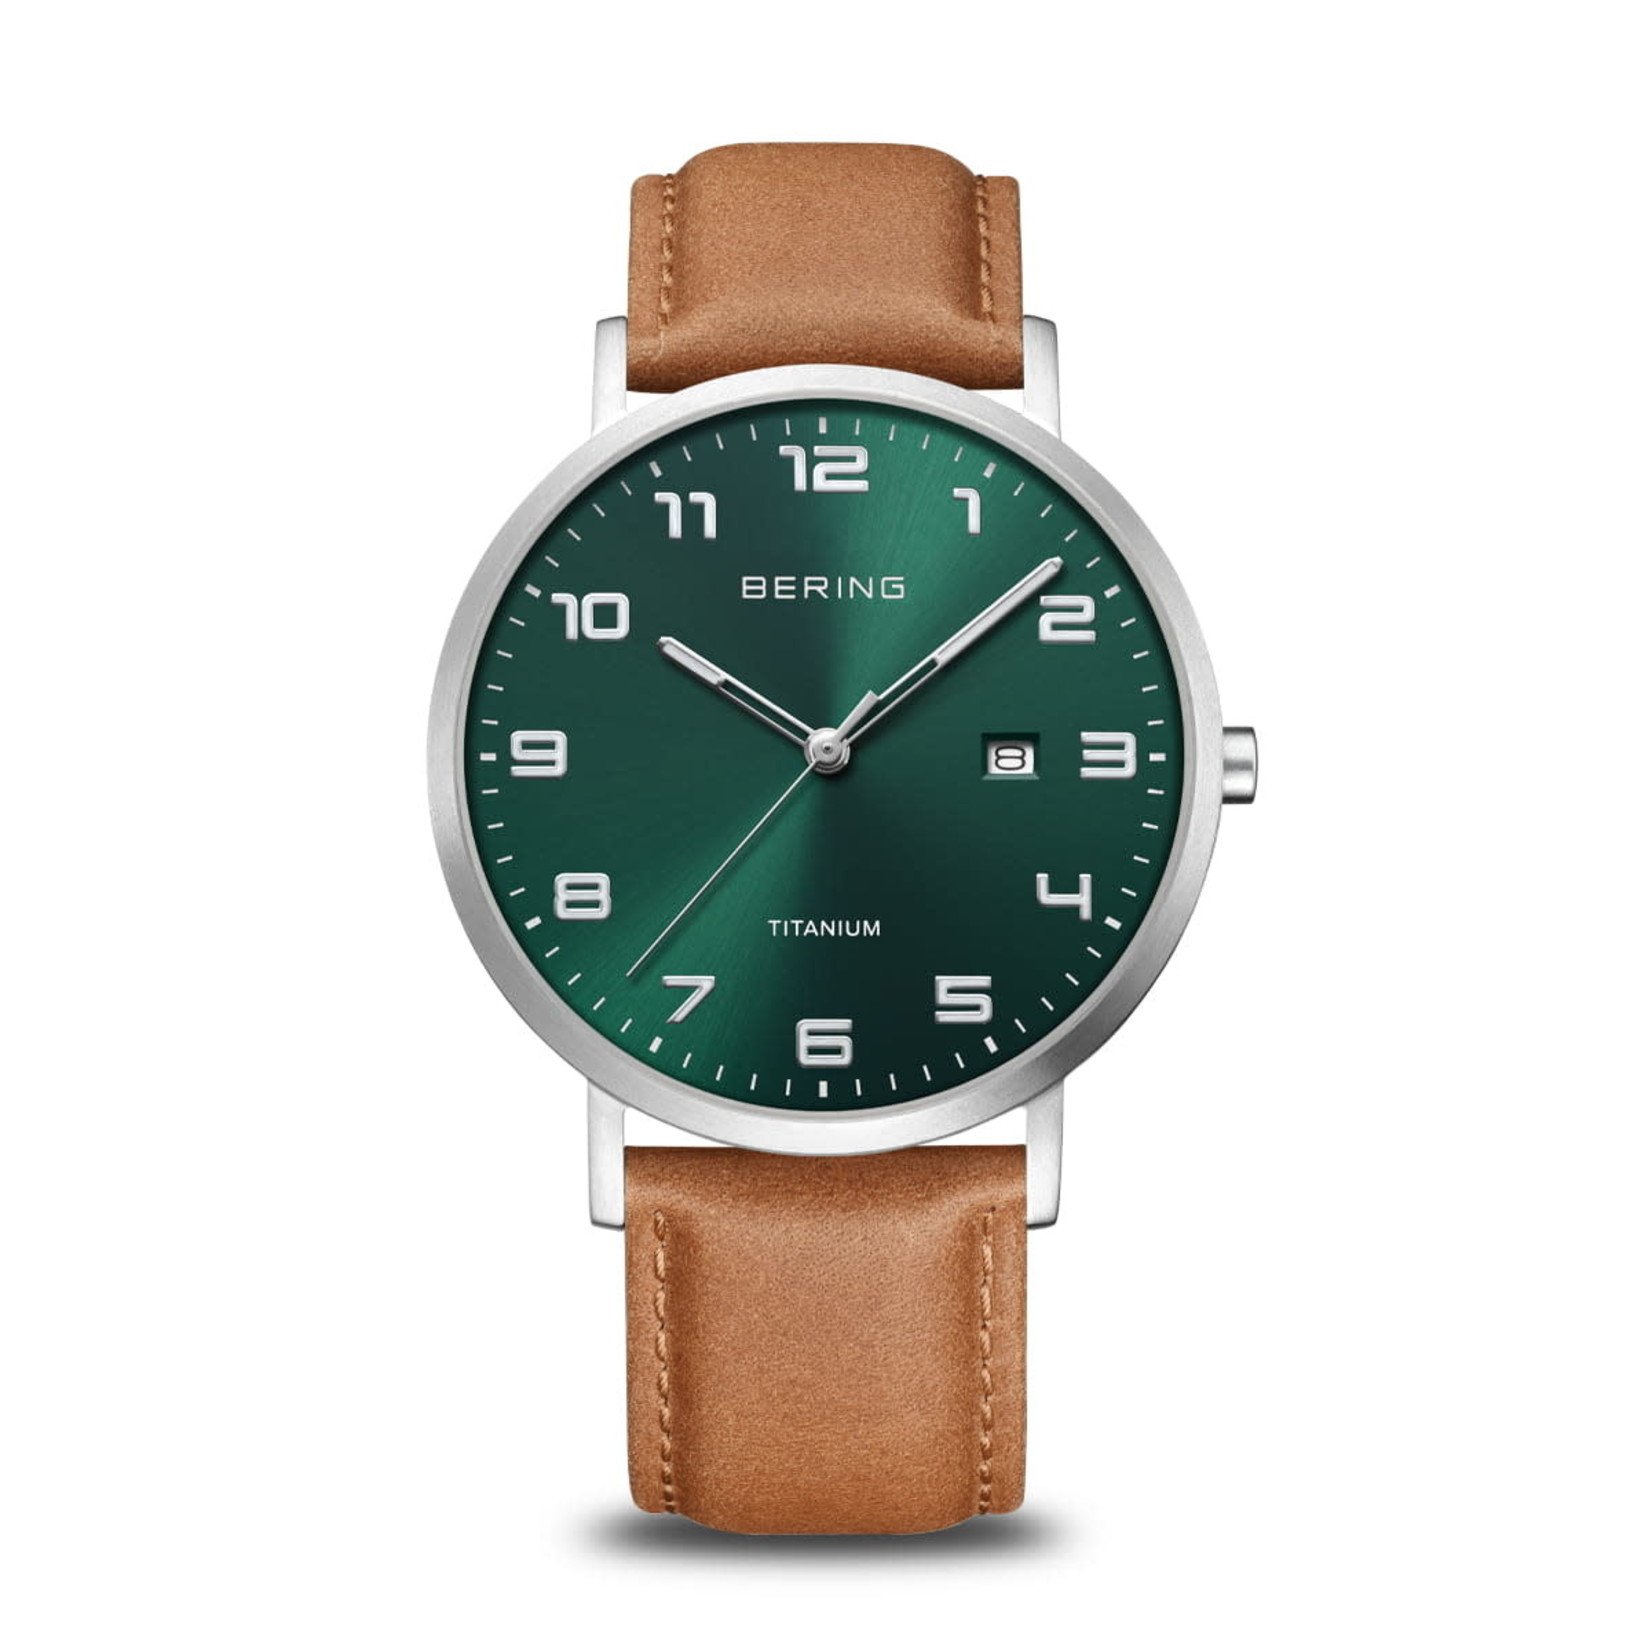 BERING Bering Titanium Watch w/Leather Strap, Green Dial & Date